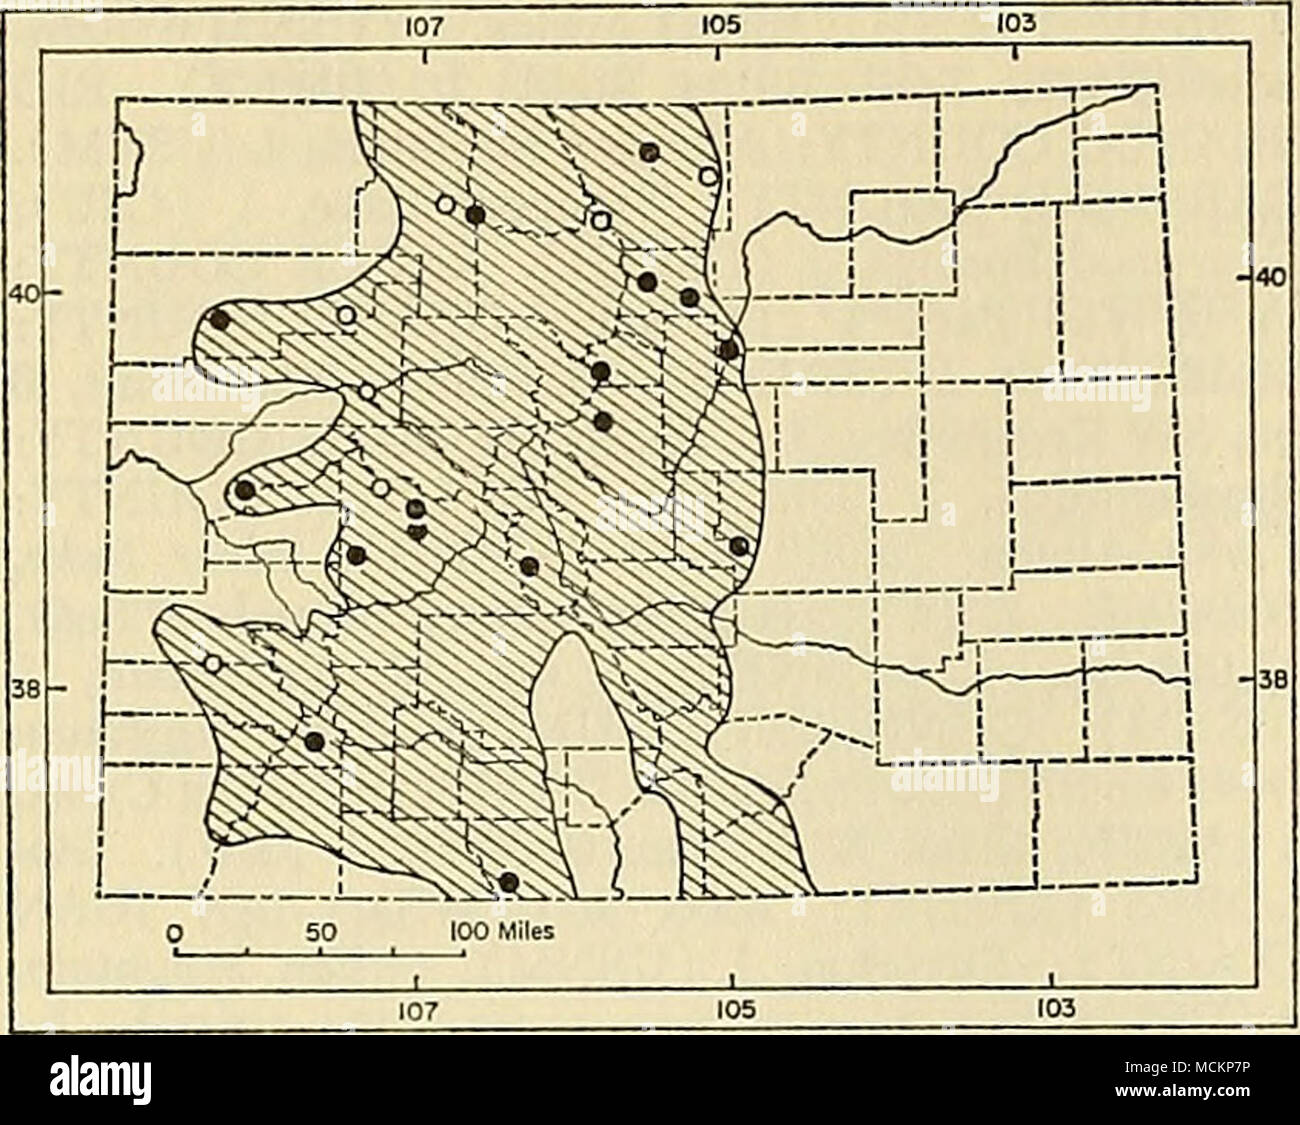 . Fig. 99. Distribution of Mustela erminea muricus in Colorado. For explanation of symbols, see p. 9. (DMNH 2510) was reported by Seton (1933) as Mustela rixosa [=M. nivalis]. F. W. Miller (1933b) corrected that misidentification. Little has been recorded concerning the natural history of the ermine in Colorado. Data on the species elsewhere in its wide range in North America were reviewed by Hall (1951b). The diet consists mostly of small rodents and insectivores; Dixon (1931) observed an ermine trying to capture a pika near Milner Pass, Rocky Mountain National Park. Mustela erminea muricus ( Stock Photo